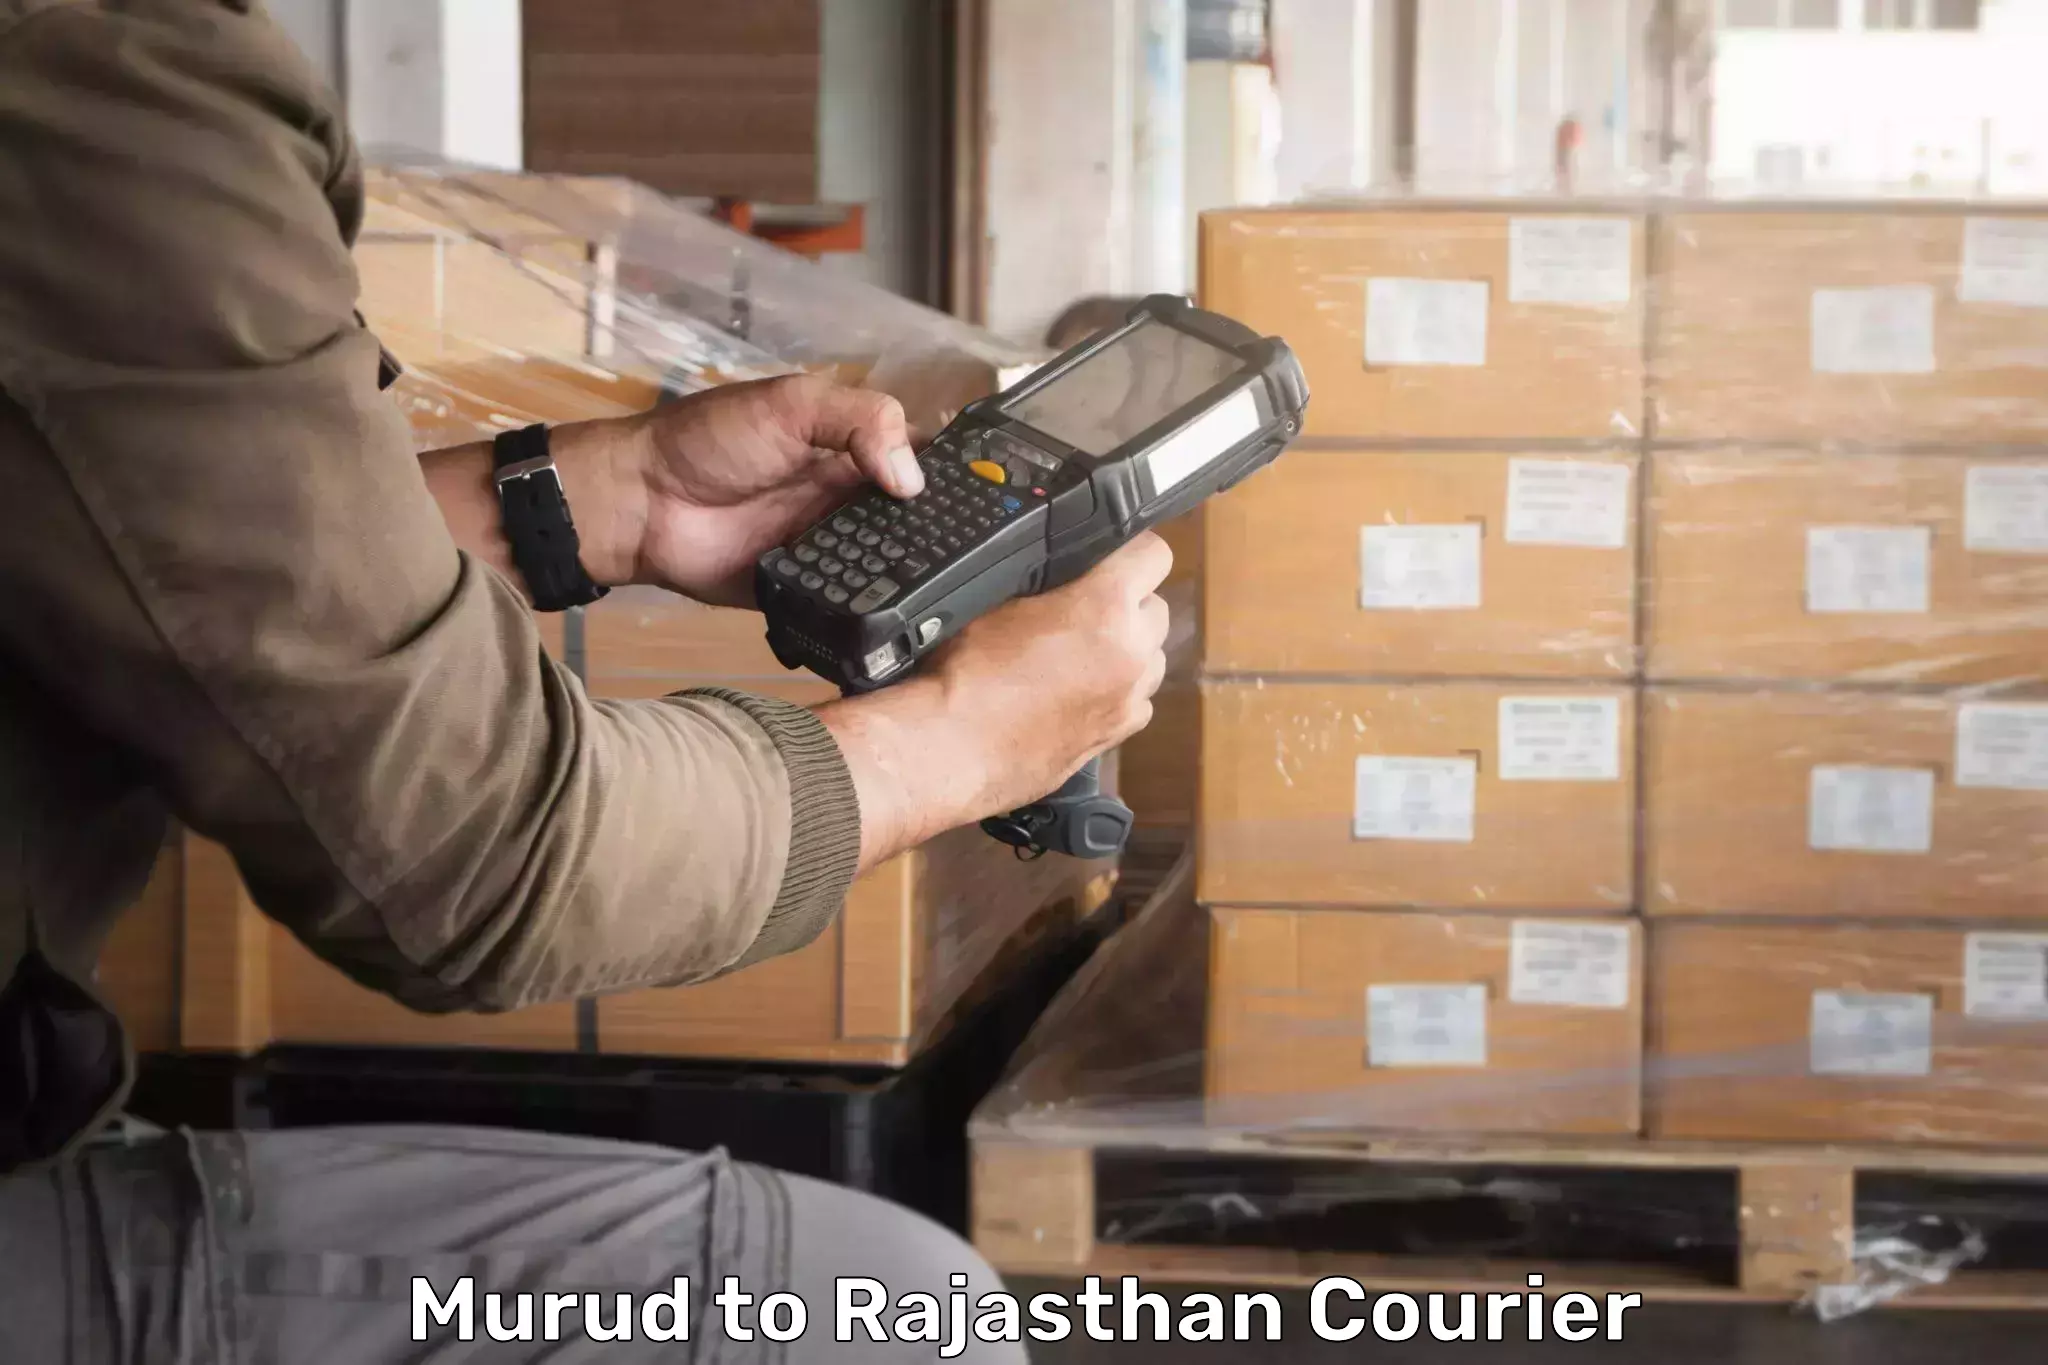 Courier service comparison Murud to Rajasthan